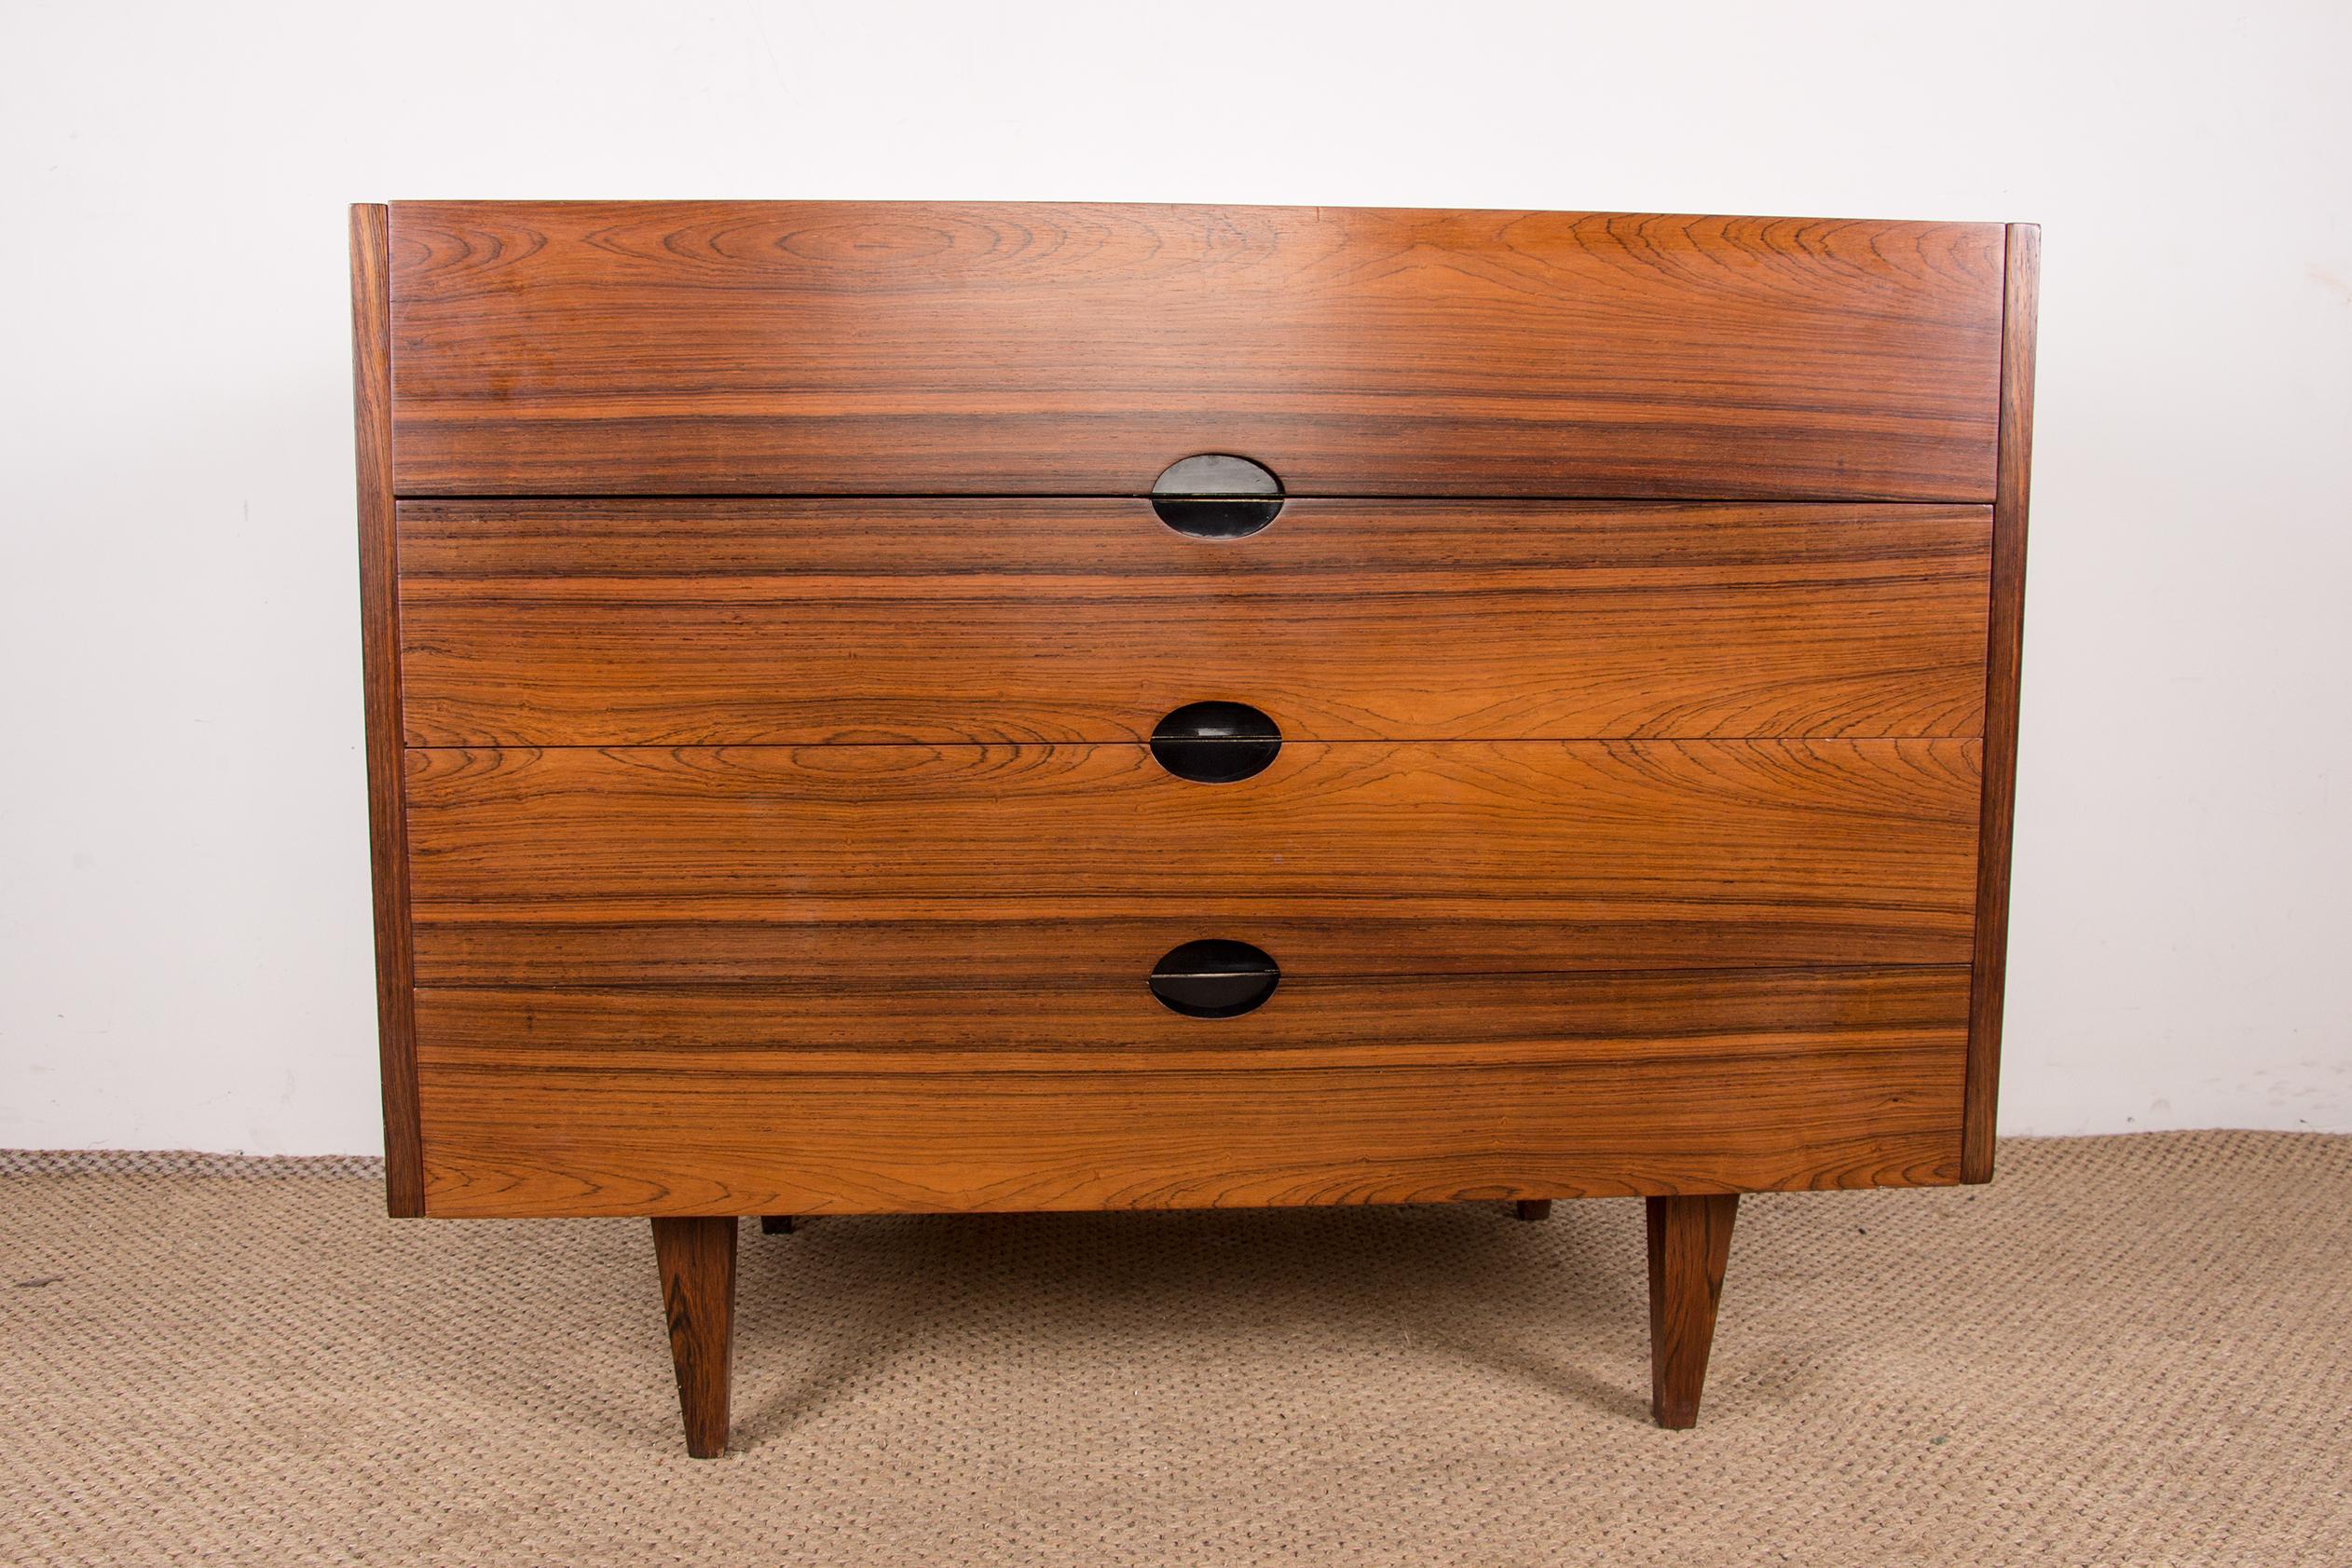 French Provincial Large Dressing Table, Chest of Drawers in Rio Rosewood, Joseph André Motte 1960 For Sale